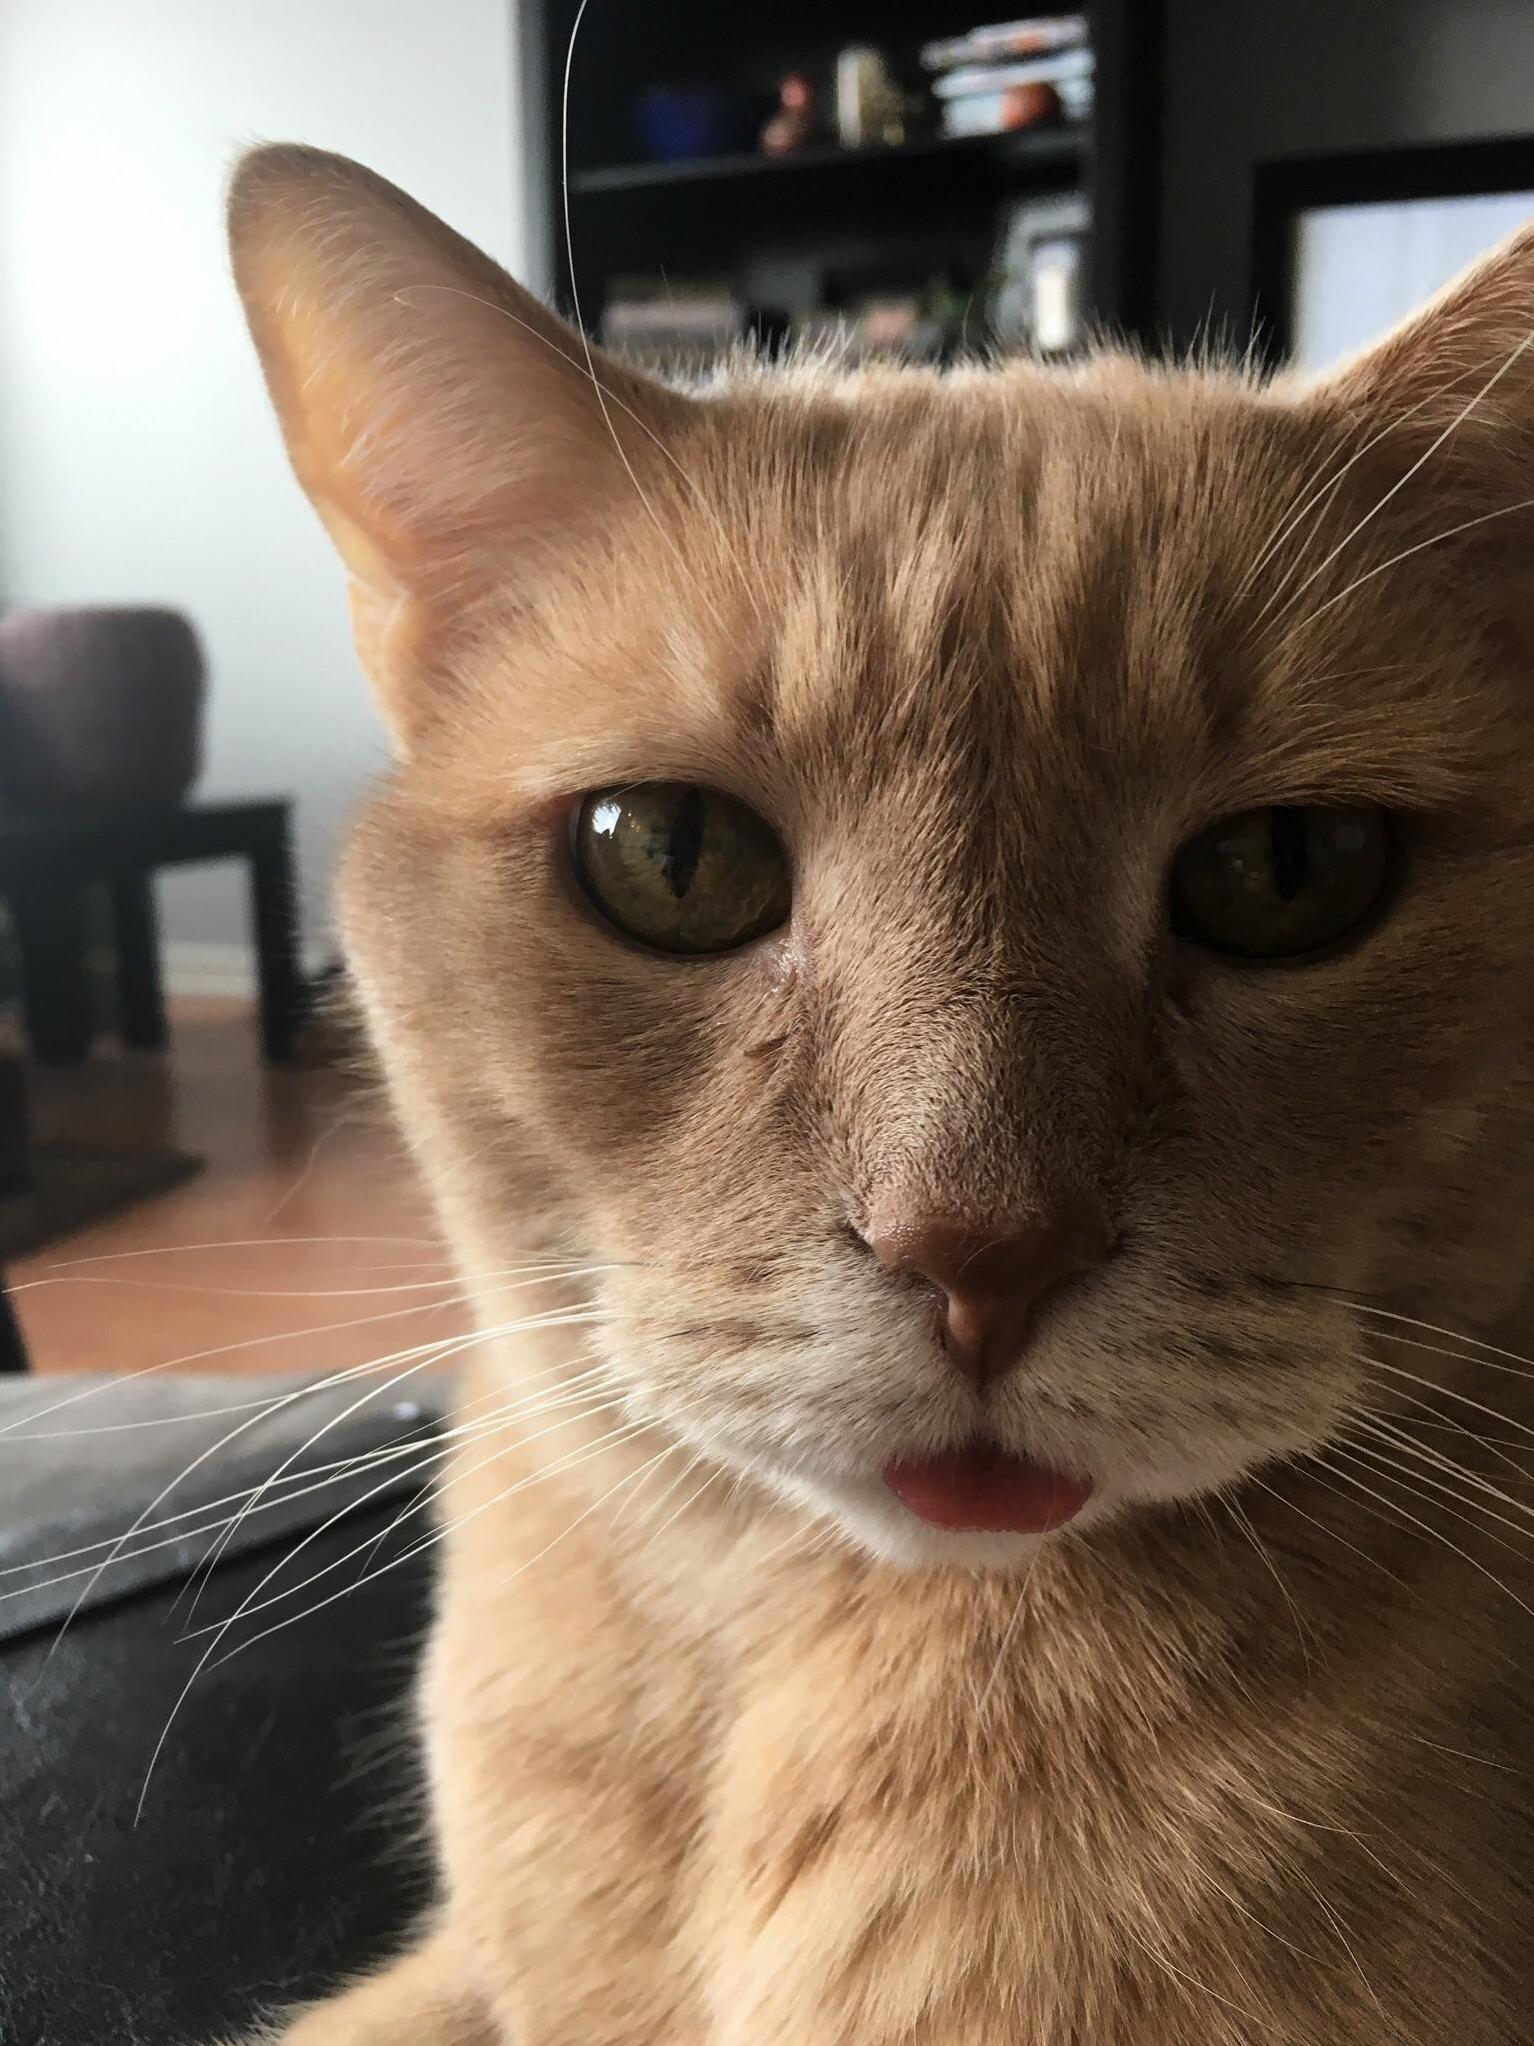 Suns out tongues out both cats are extra photogenic today. meet oscar